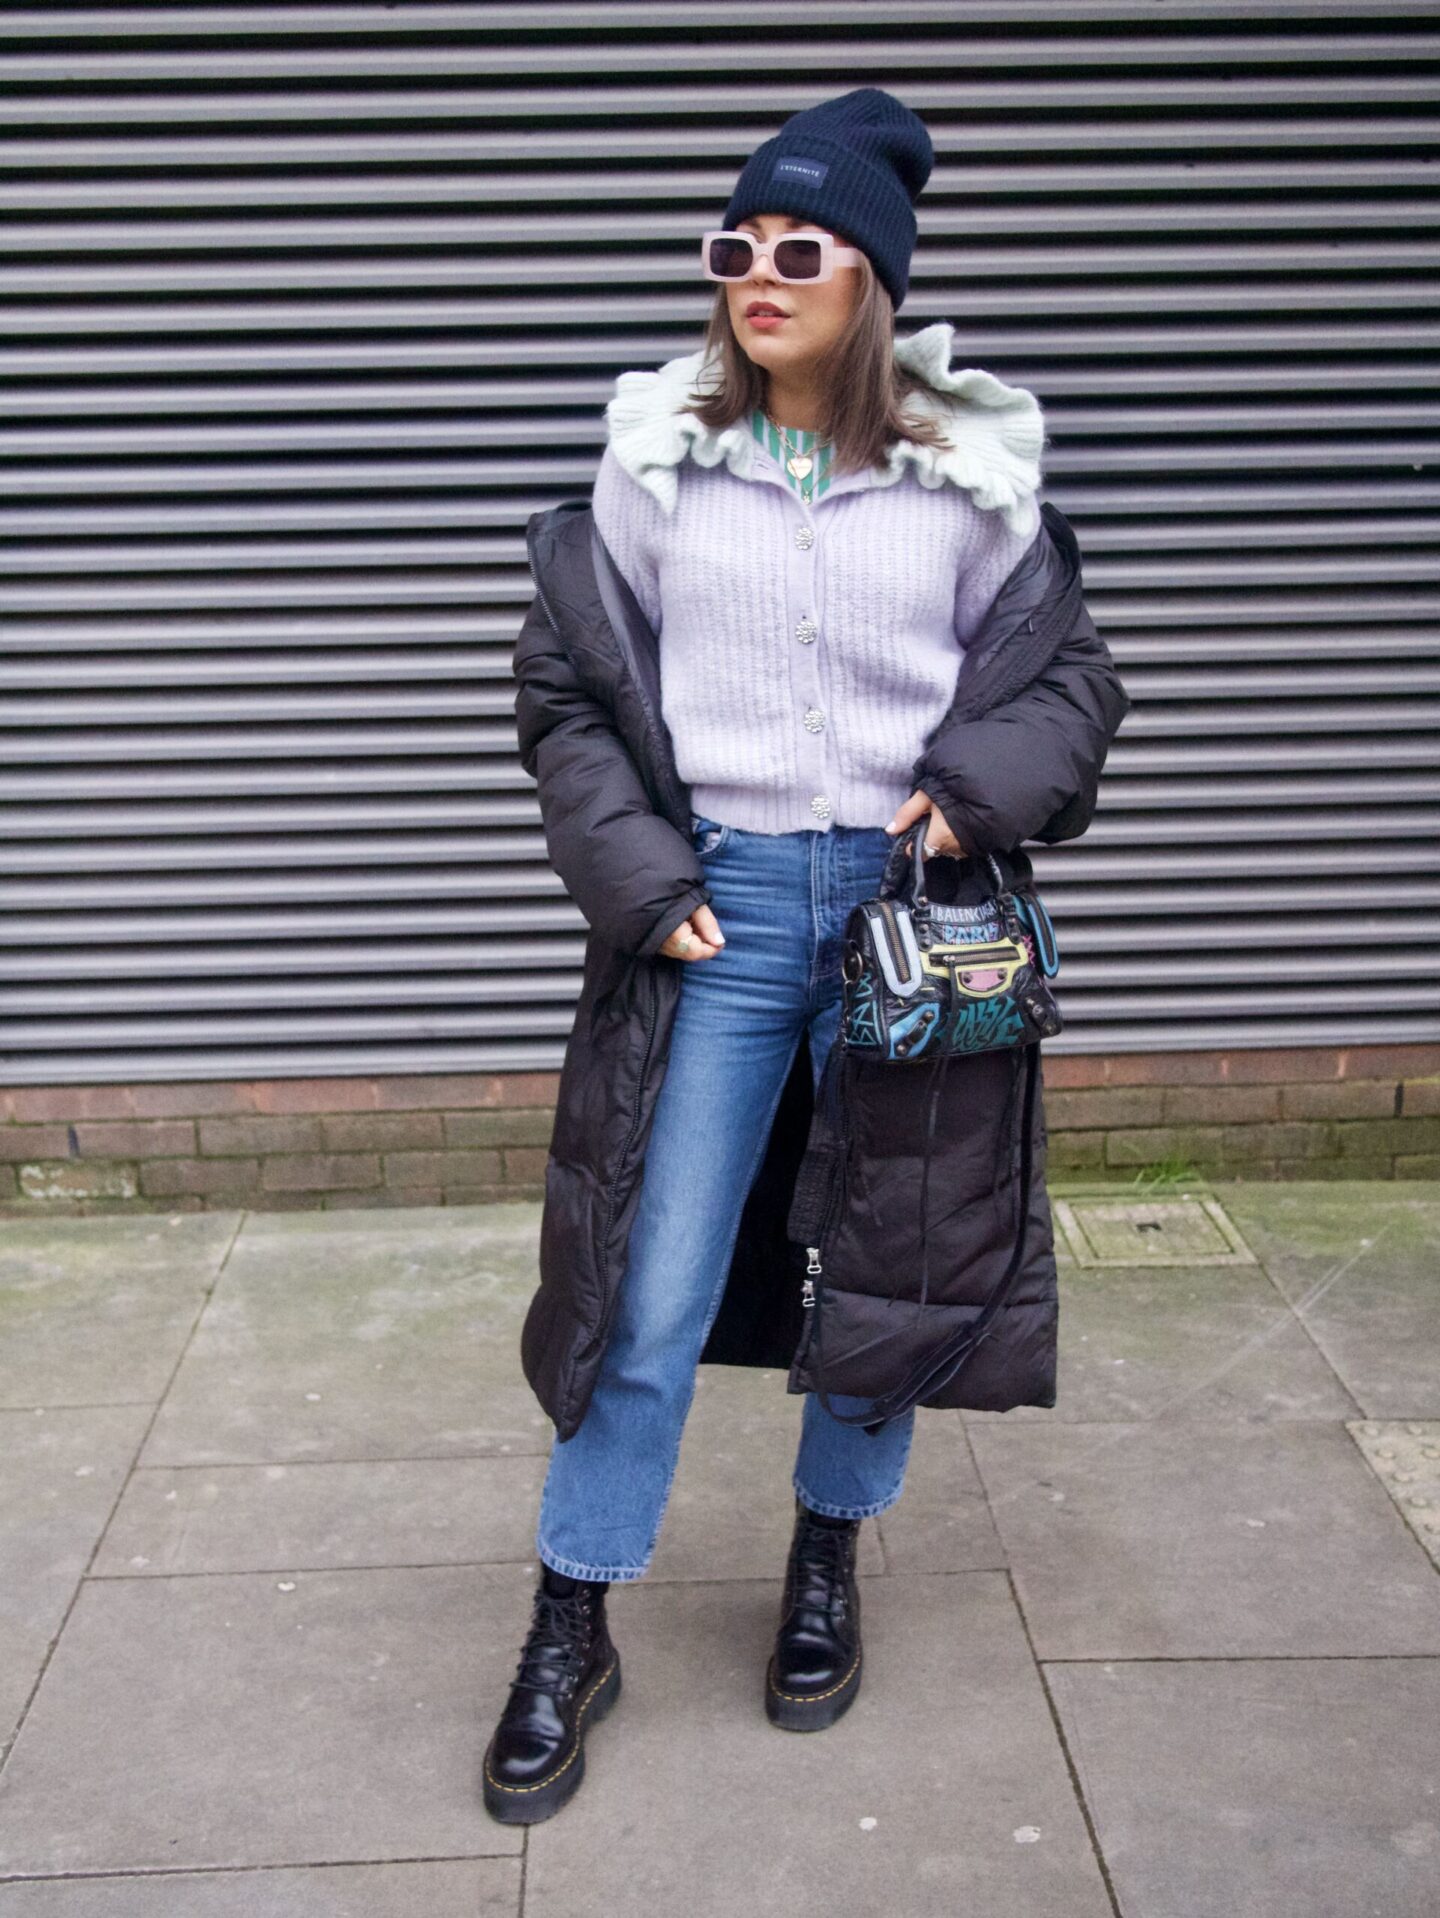 manchester fashion looks, fashion looks, pastel colours, spring outfit, Balenciaga bag, designer bag, candy colours, weekday coat, designer looks, influencer , 